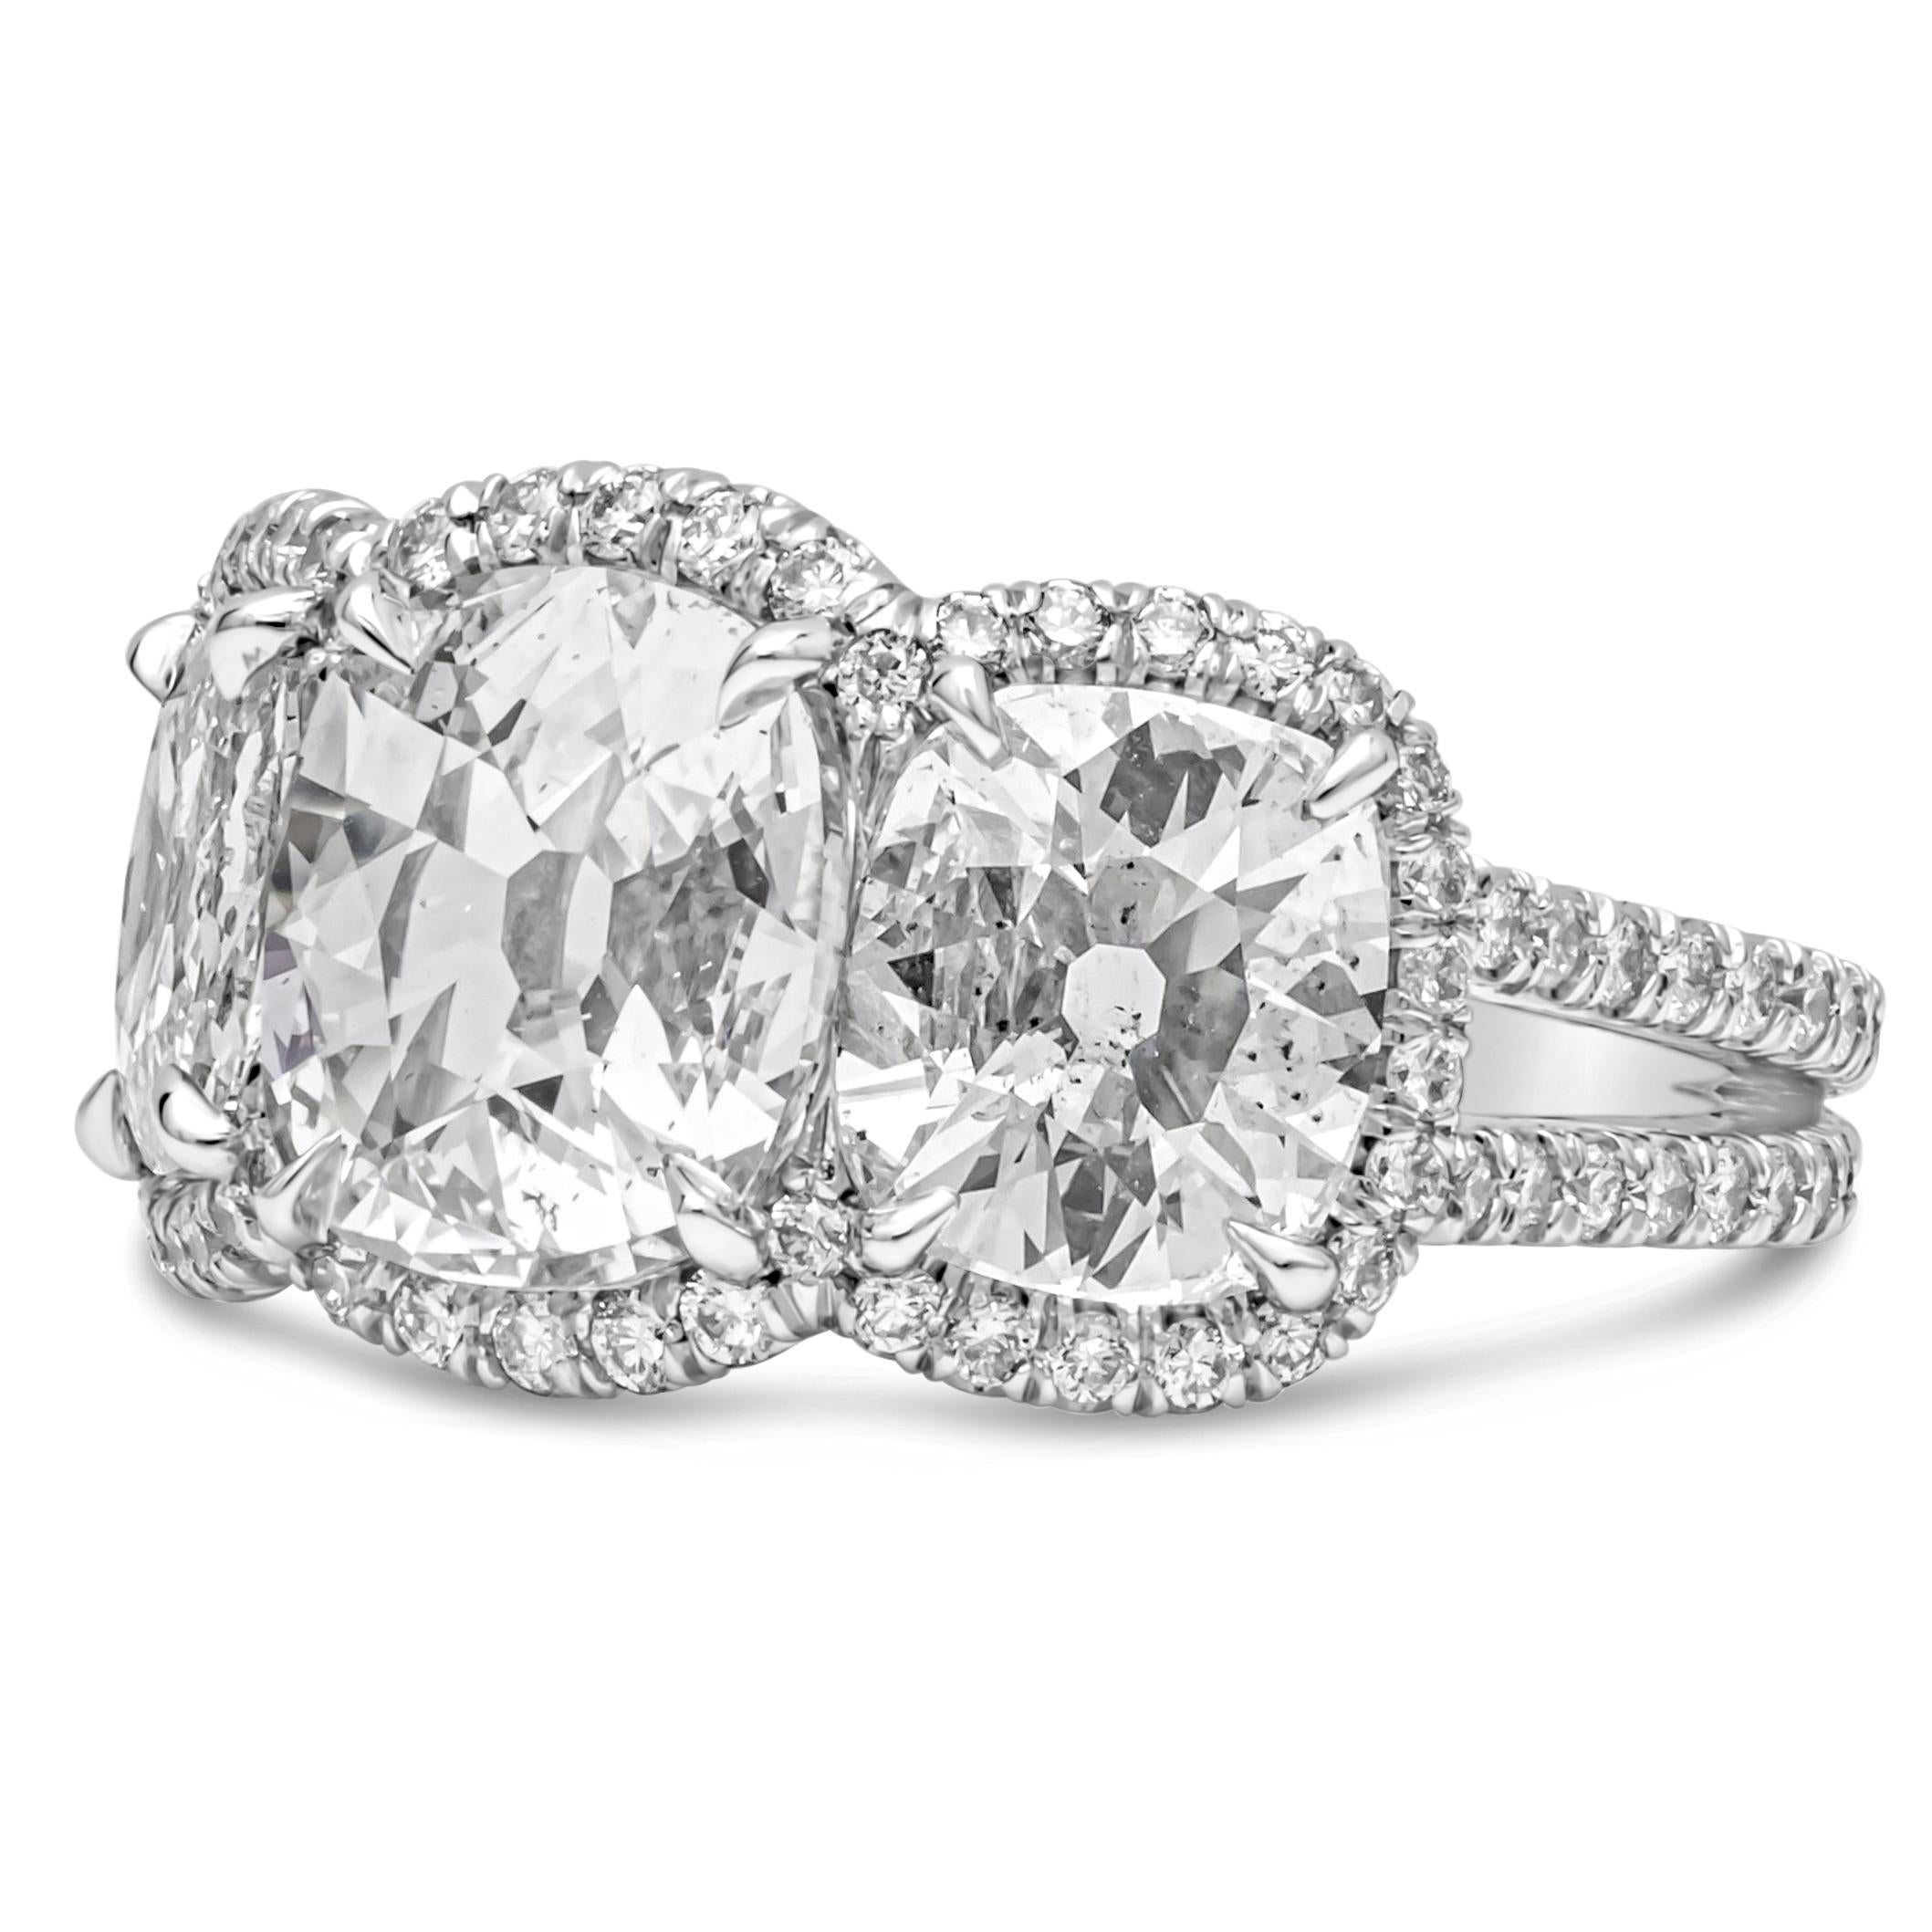 Features 1.71 carats cushion diamond in the center certified by GIA as H color and SI2 in Clarity. Flanked by two EGL certified cushion cut diamonds on each side weighing 2.08 carats total, F color, VS2-SI1 in clarity respectively. Accented by a row